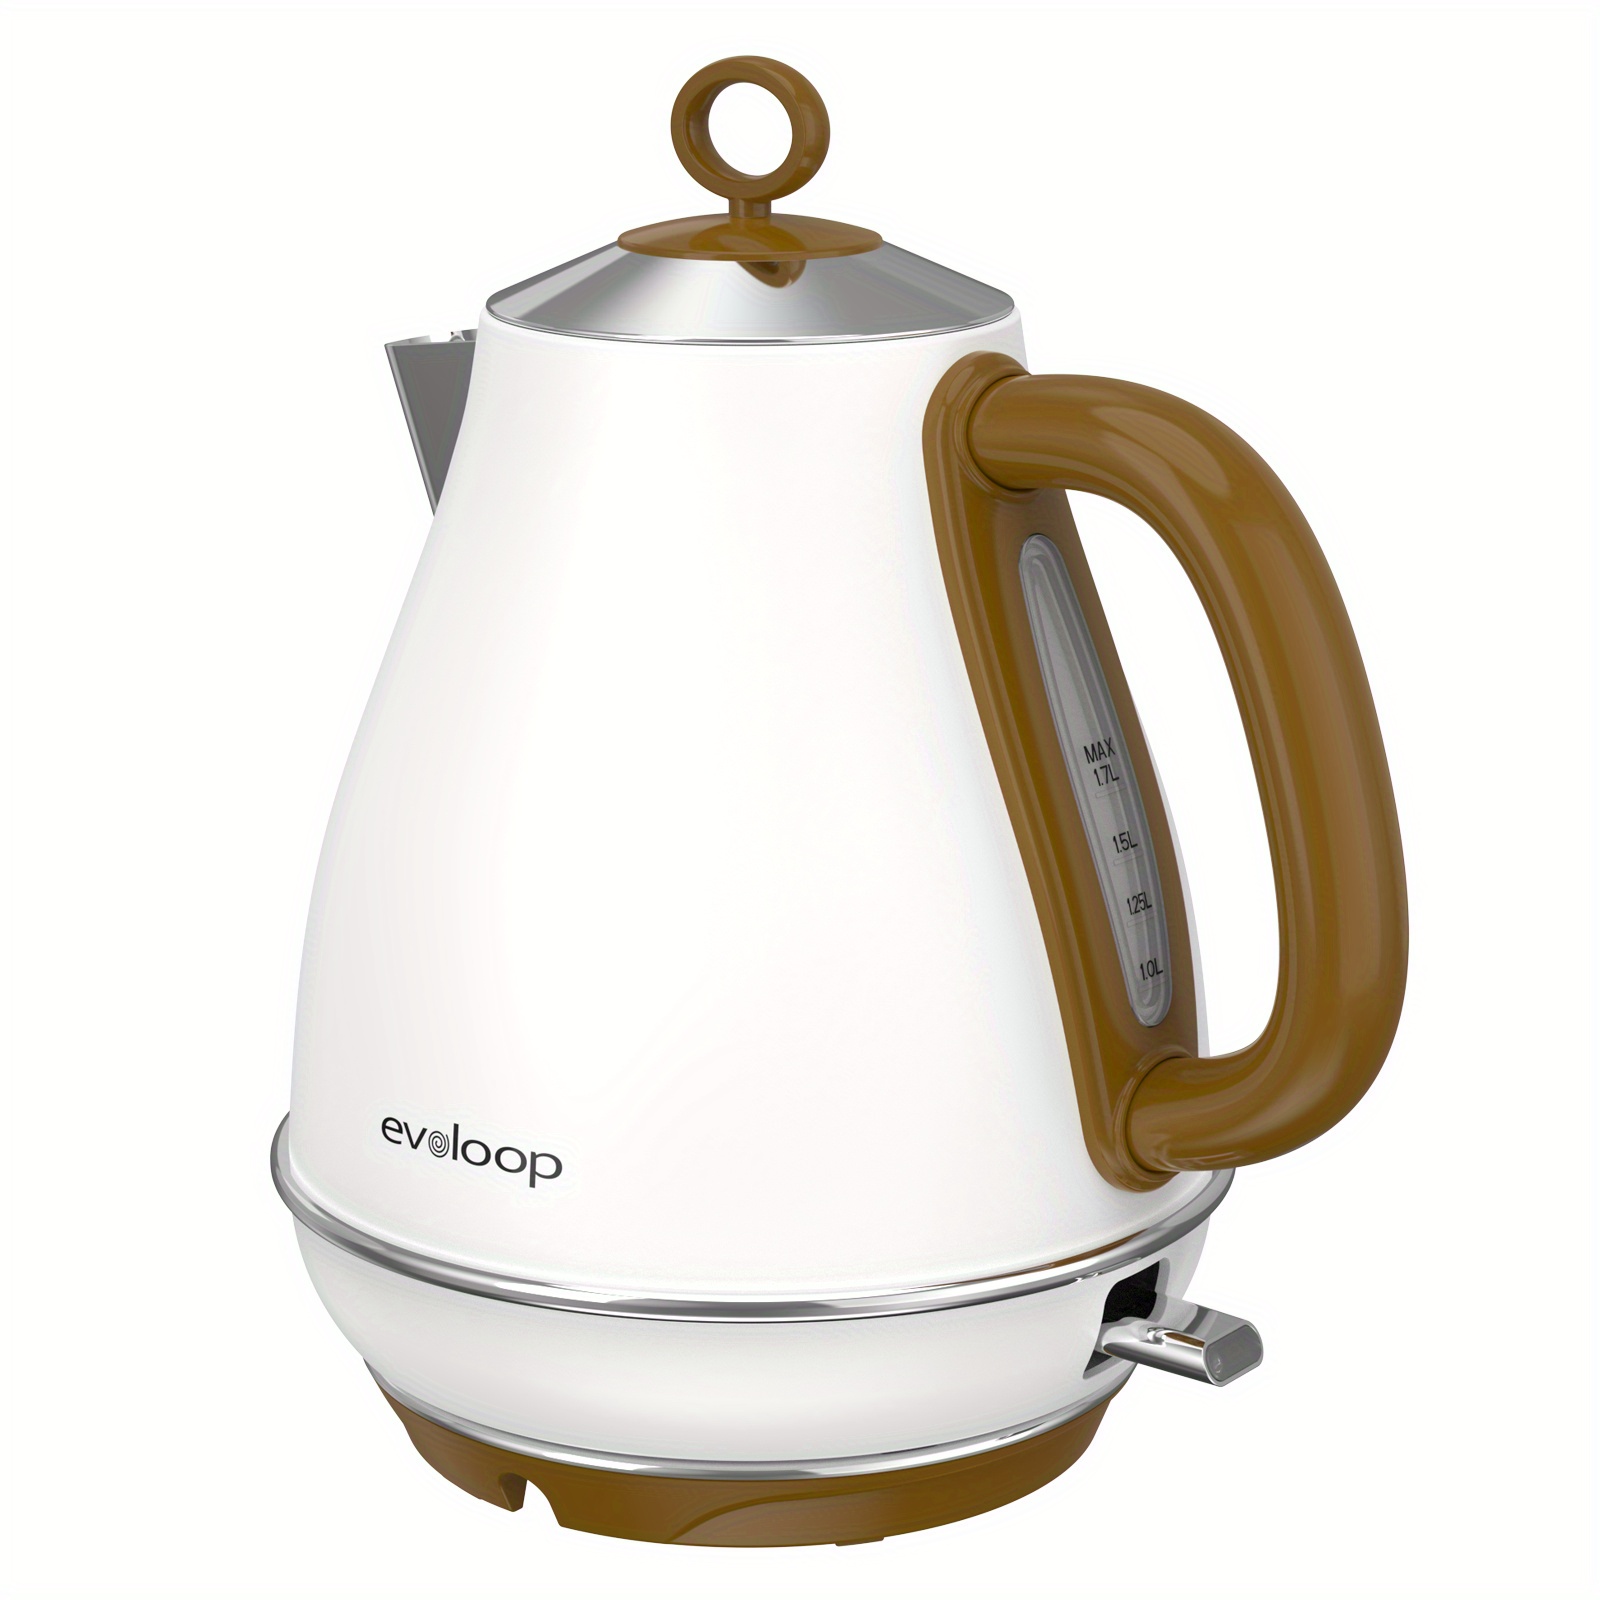 China Milk Kettles Handy Auto Shut-off Function Chaleira ELé Trica  Countertop Electric Kettle for Boiling Water - China Electric Hot Water  Kettle and Wide Opening Tea Kettle price